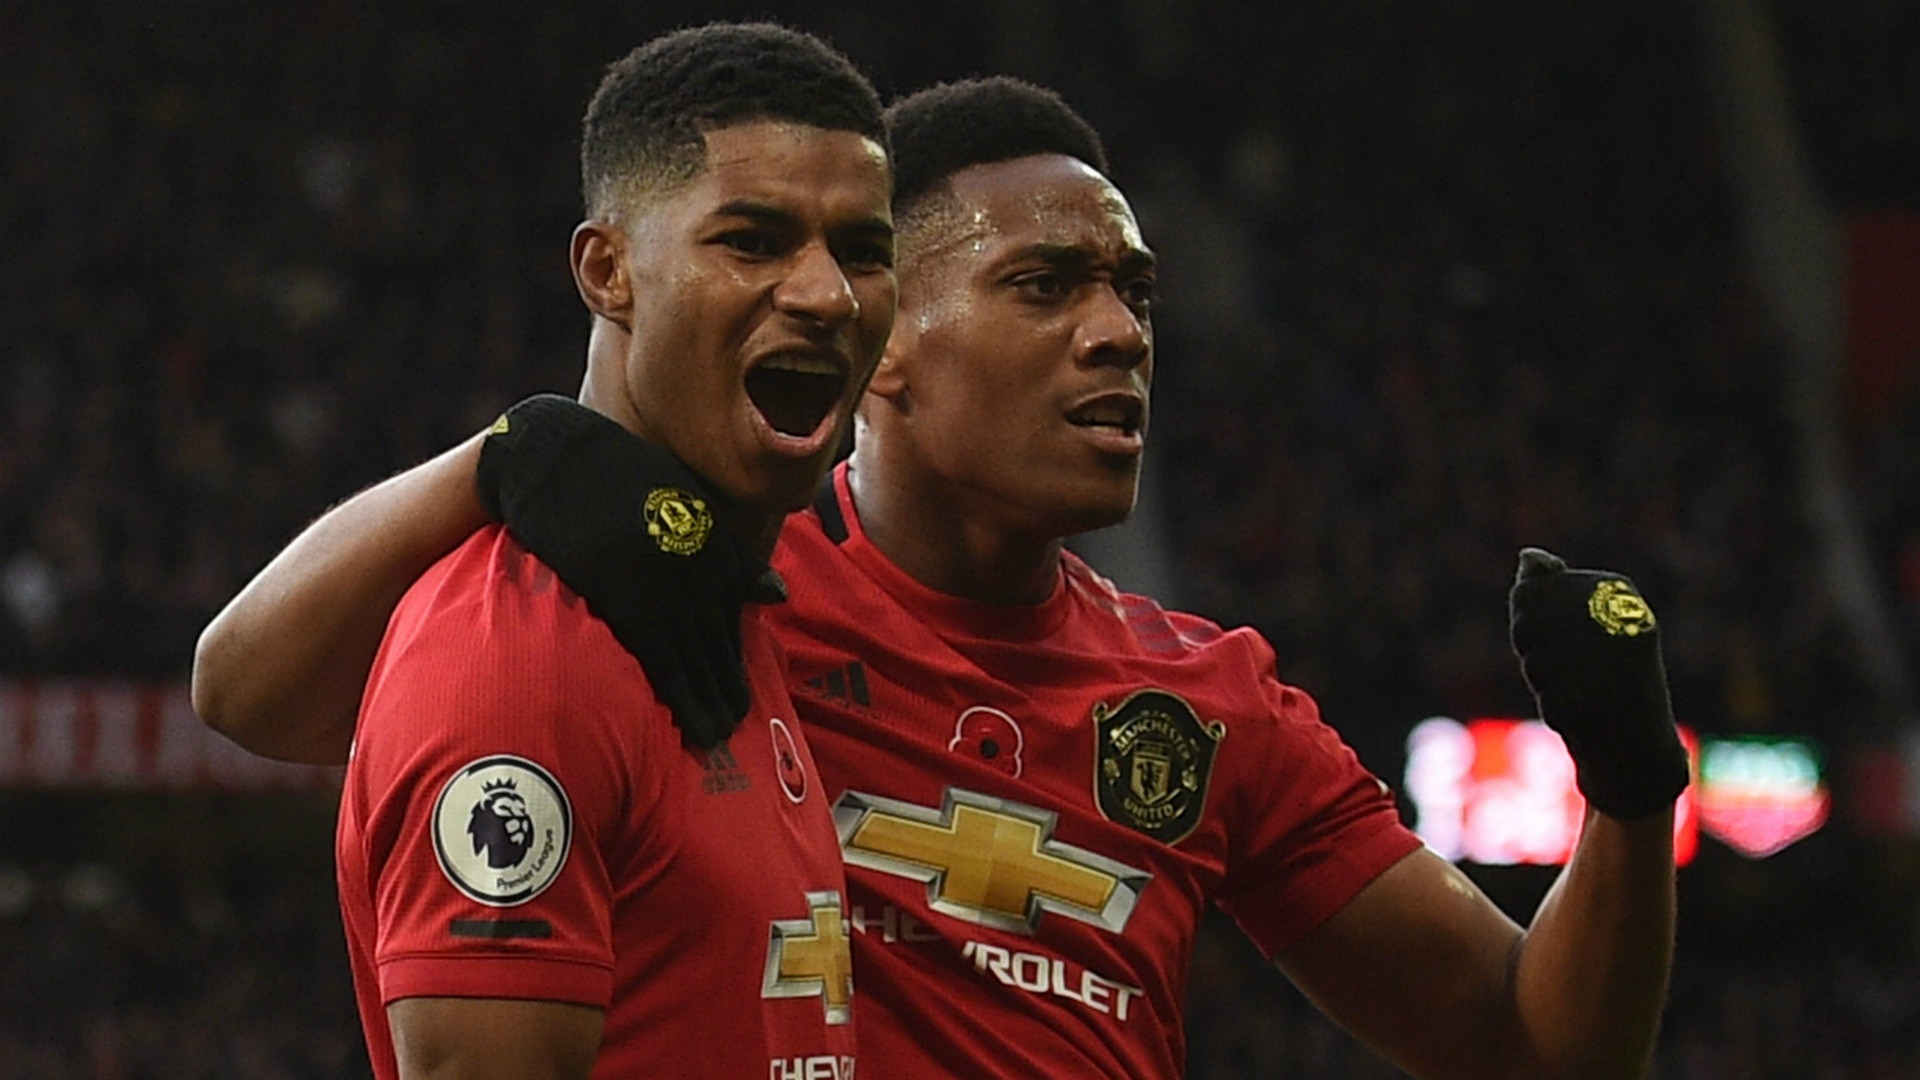 The two easy signings Manchester United can make in January [Chong + Gomes] - Bóng Đá